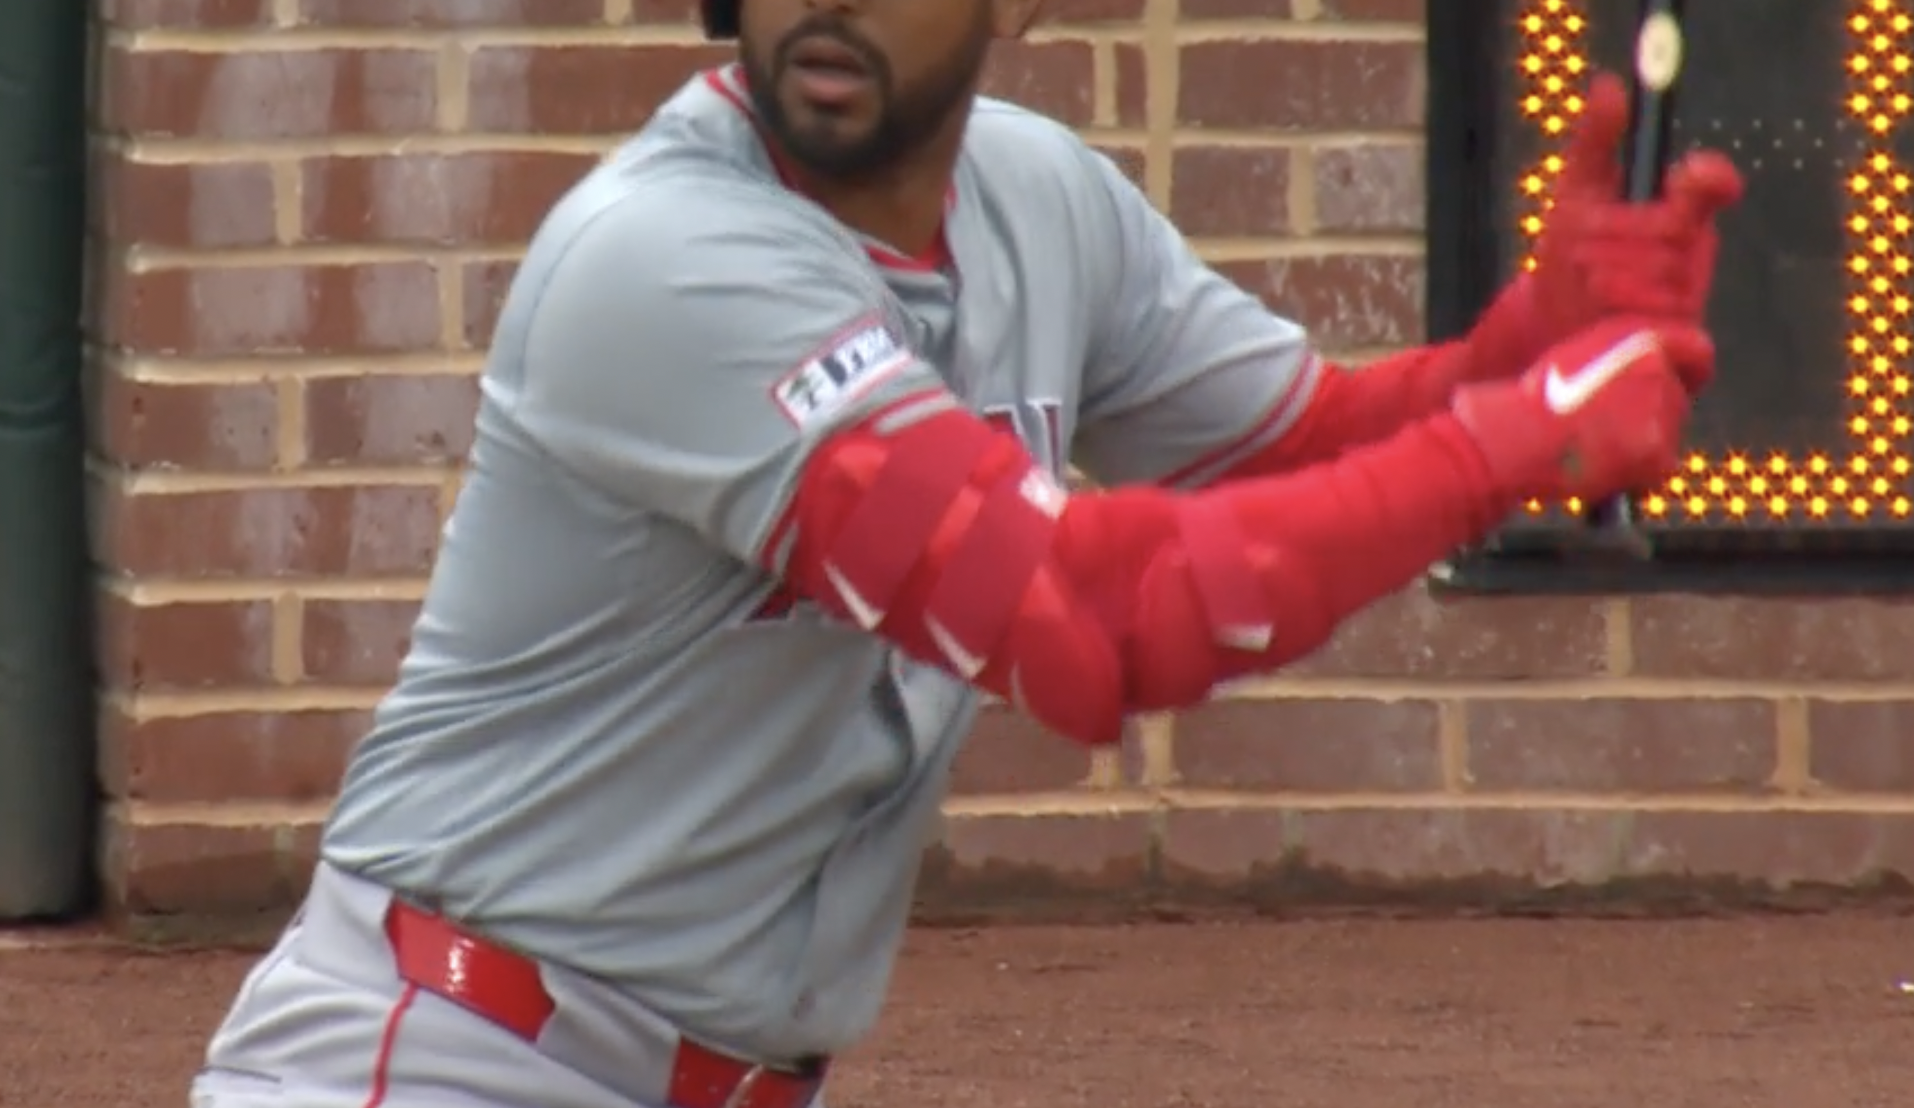 close up on a baseball player ready to swing. he's wearing red sleeves with red elbow guards on top